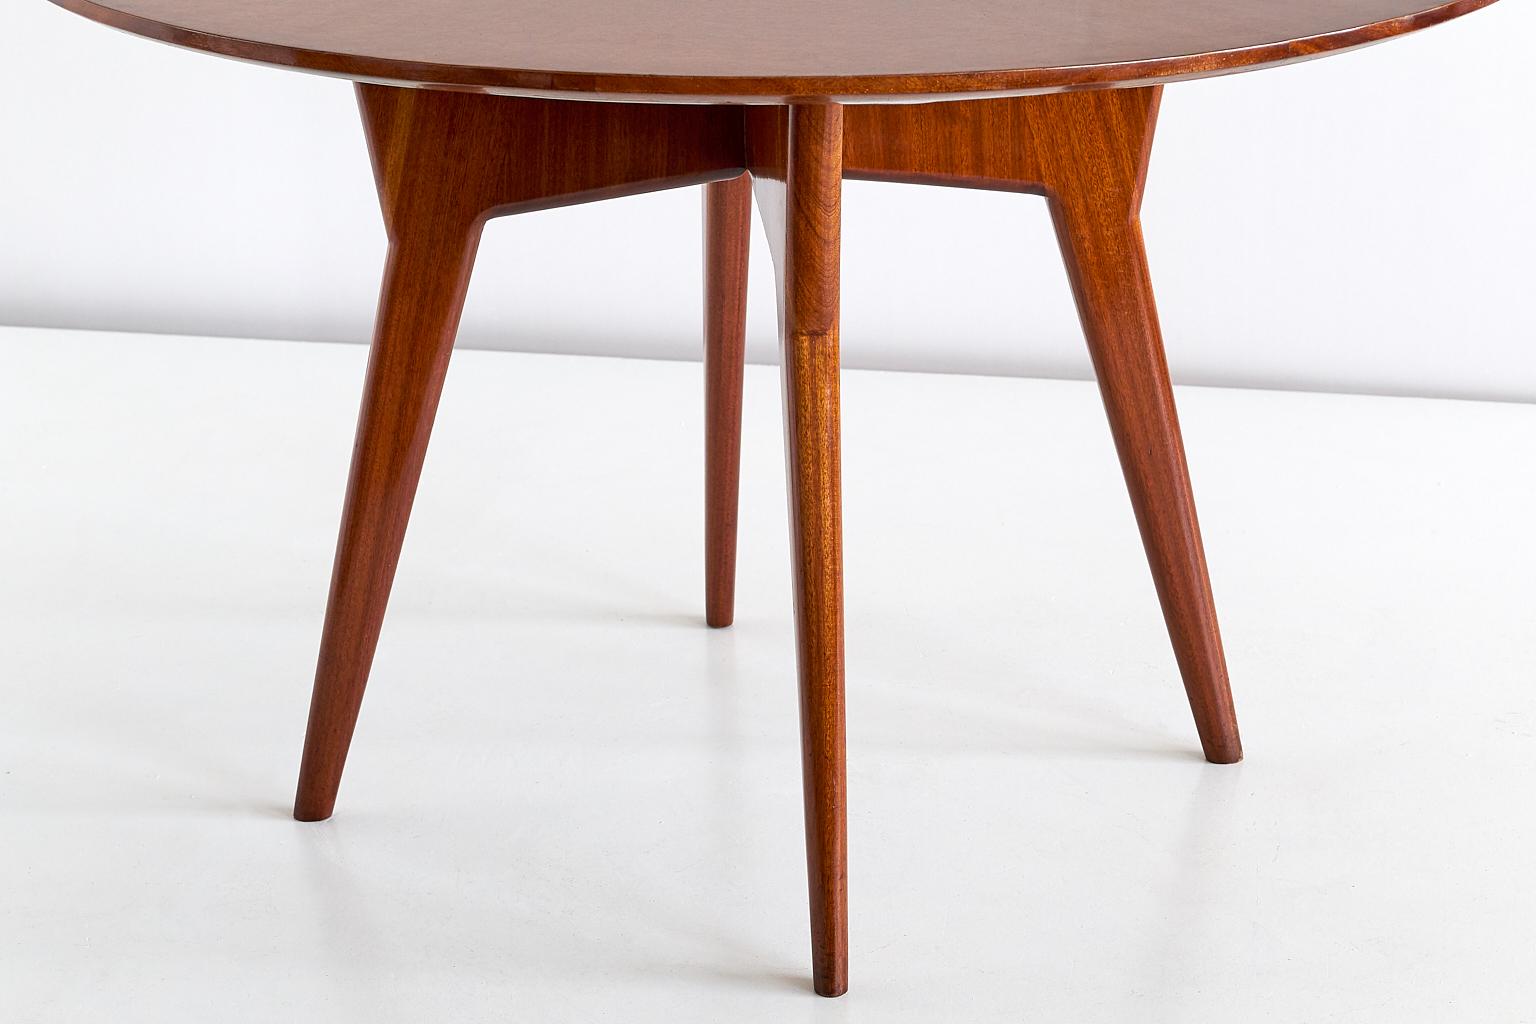 Italian Gio Ponti Round Dining Table in Mahogany and Thuja Burr, Italy, Early 1950s For Sale